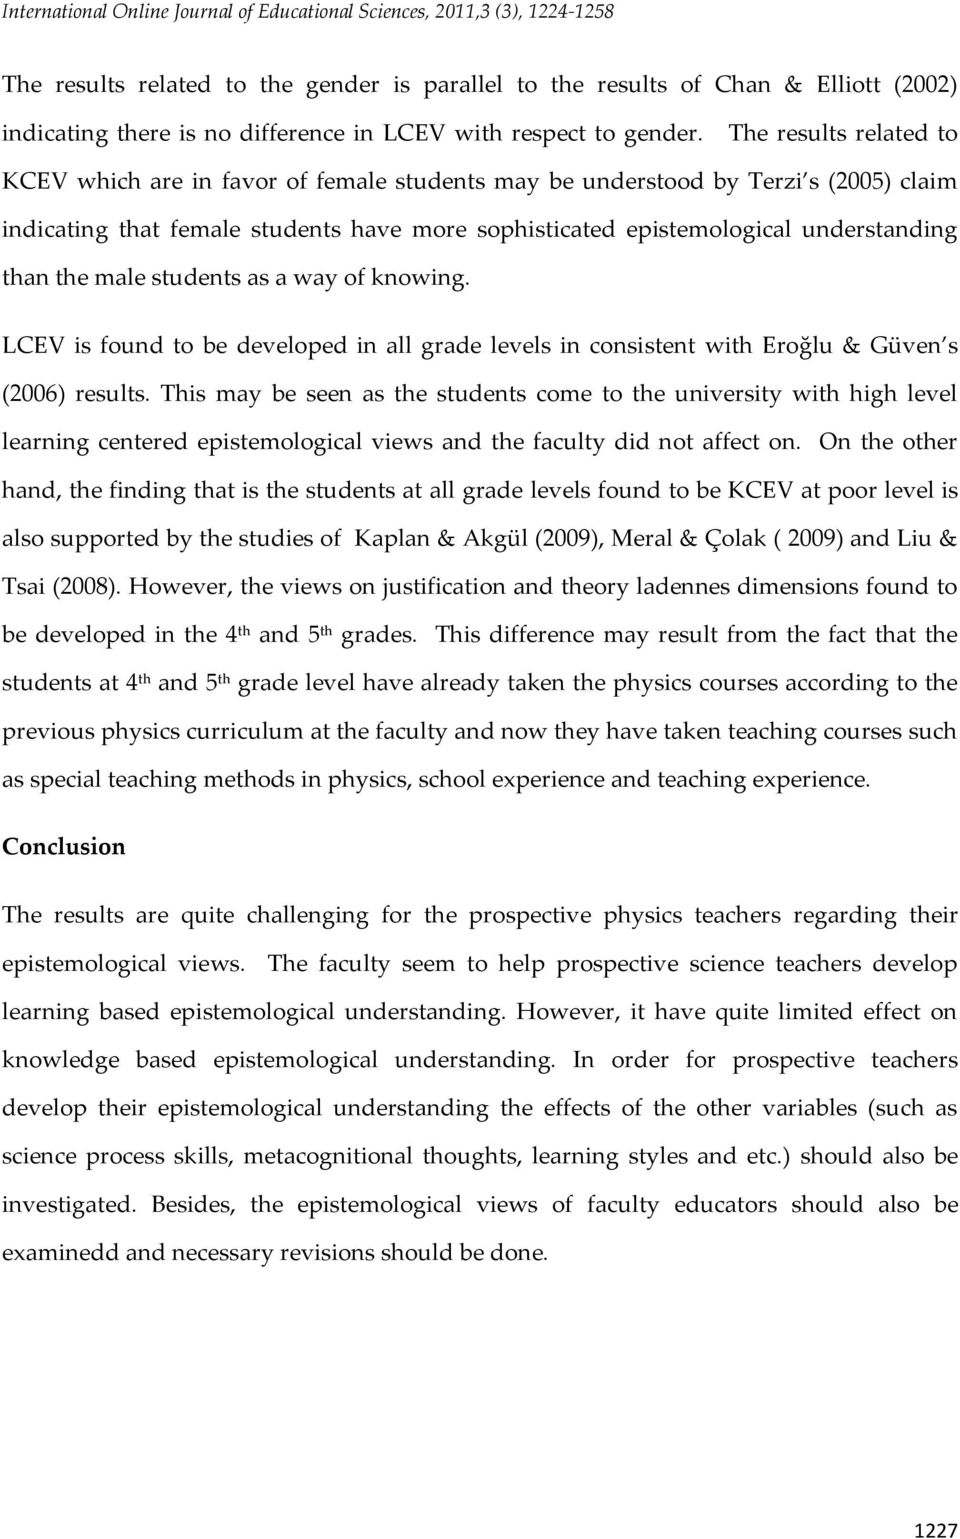 The results related to KCEV which are in favor of female students may be understood by Terzi s (2005) claim indicating that female students have more sophisticated epistemological understanding than